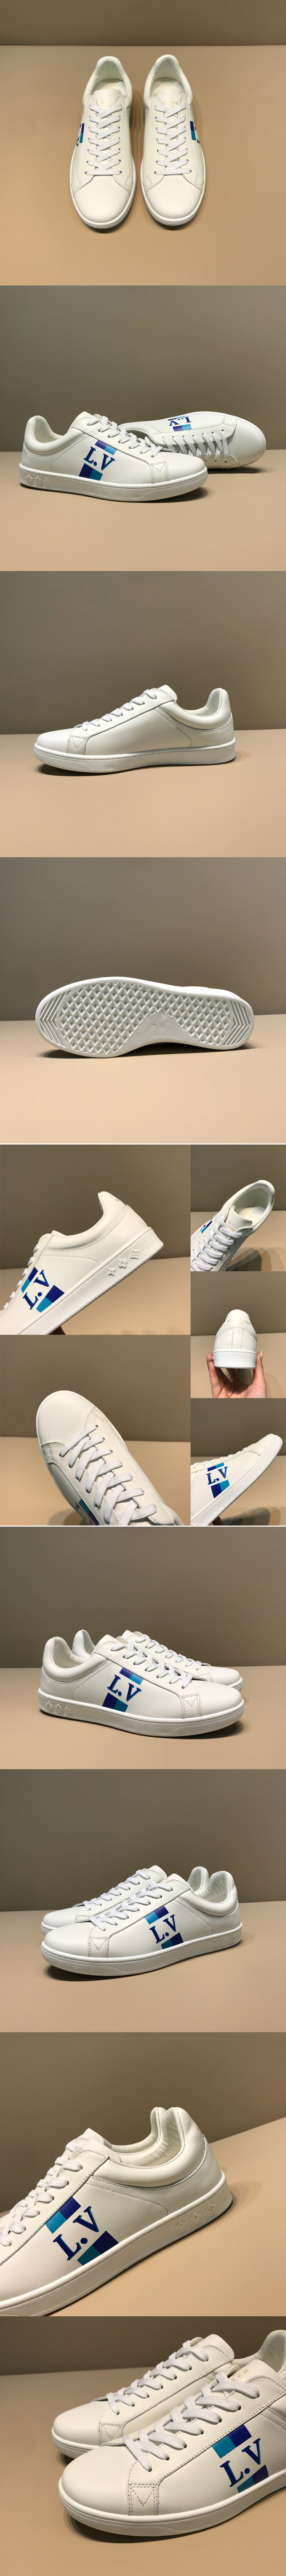 Replica Louis Vuitton 1A57T9 LV Luxembourg Sneaker in White Calf leather With Blue web